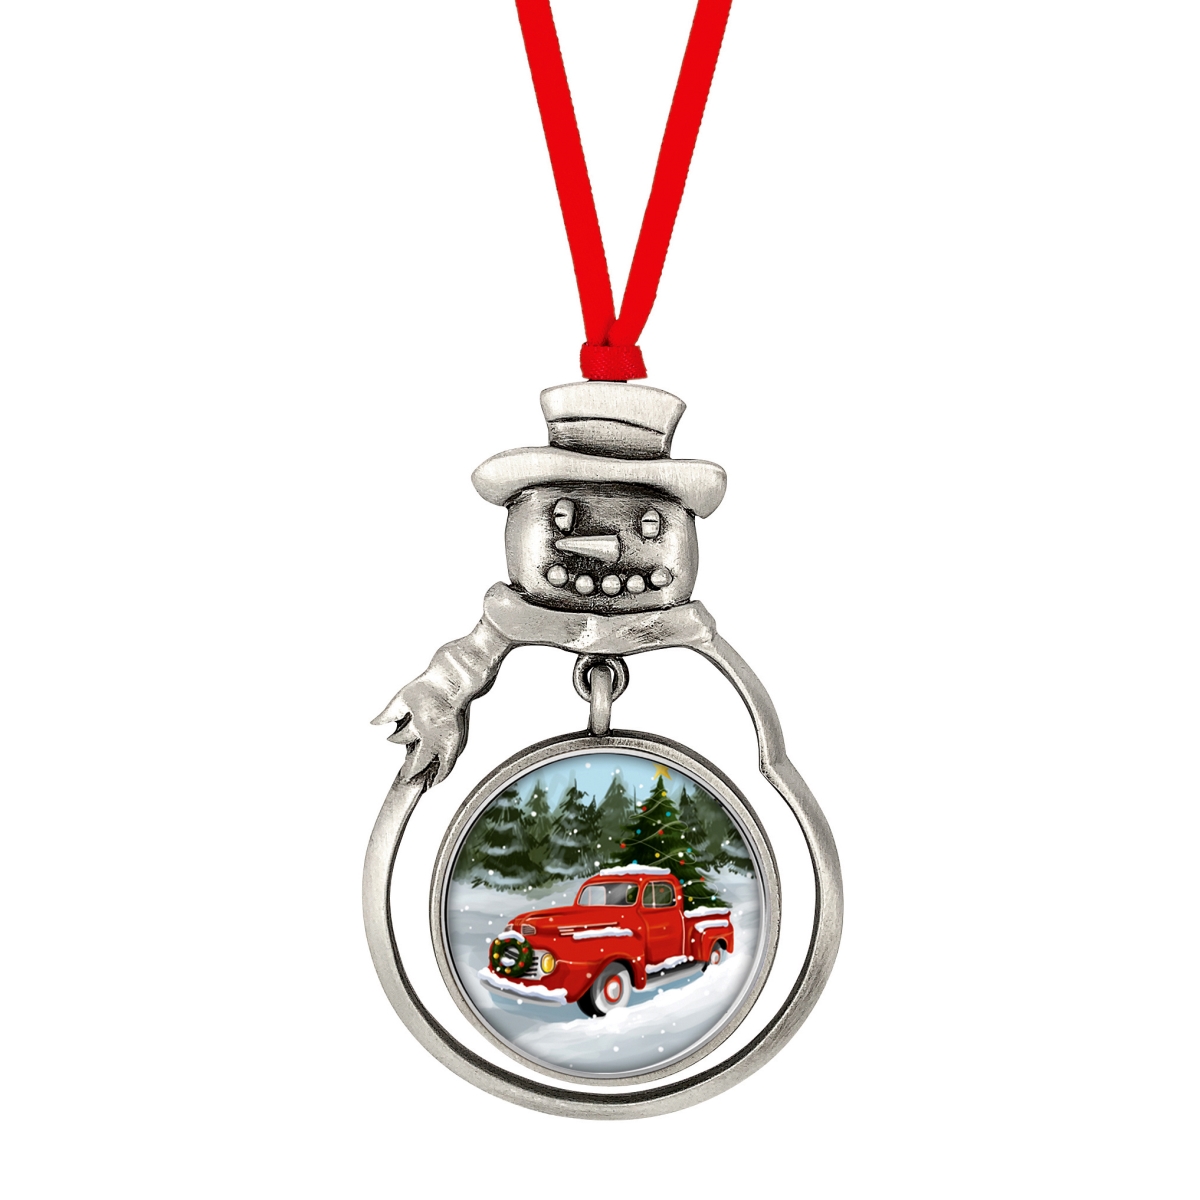 Picture of American Coin Treasures 16615 JFK Half Dollar Snowman Ornament with Colorized Vintage Christmas Tree Truck Coin, Red